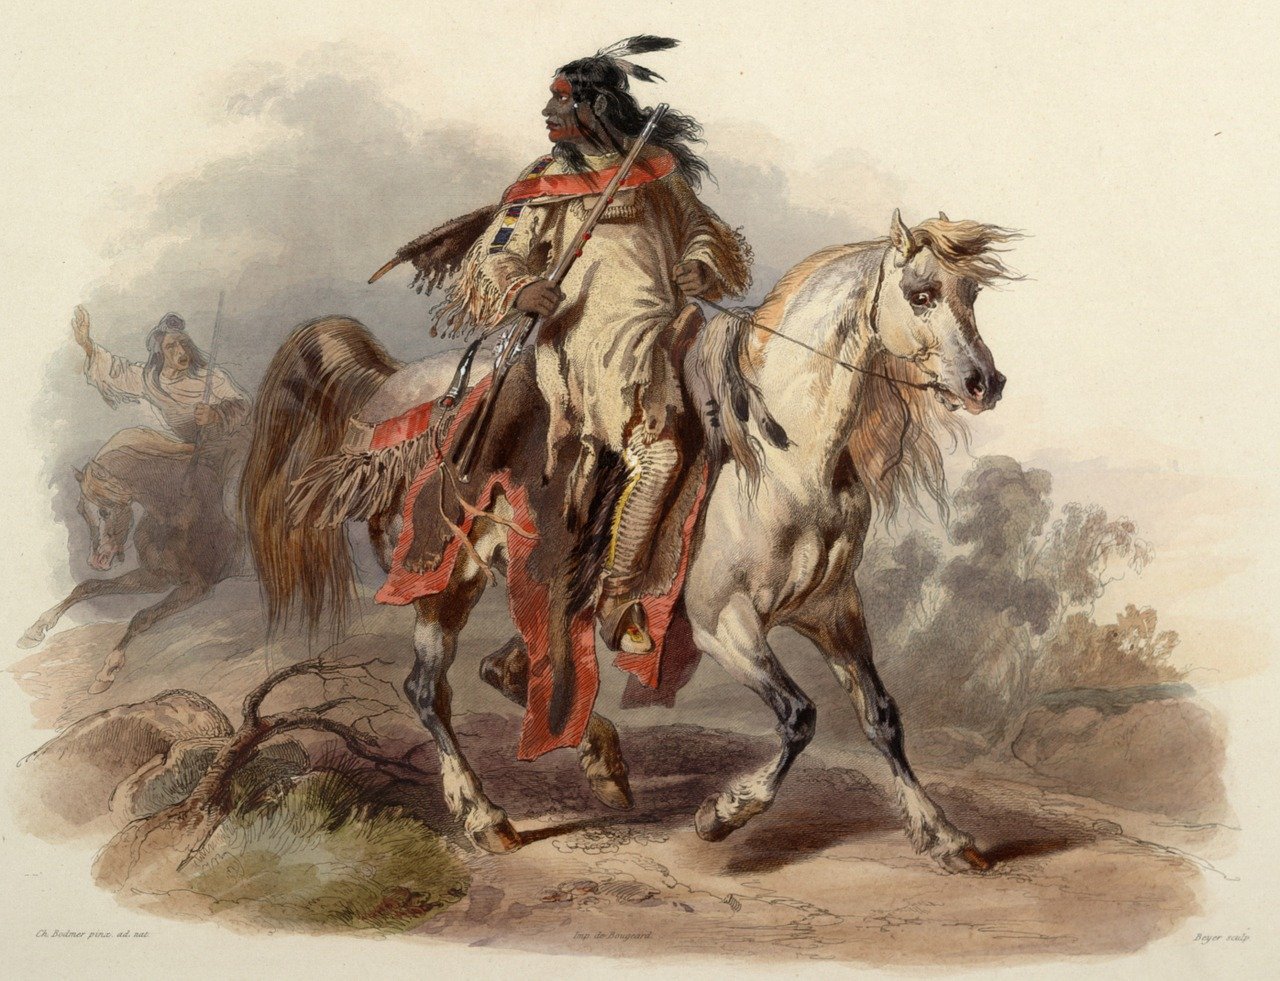 a man riding on the back of a white horse, an illustration of, by Karl Bodmer, tumblr, portrait of pocahontas, bright scene, portrait of a warrior, hildebrandt